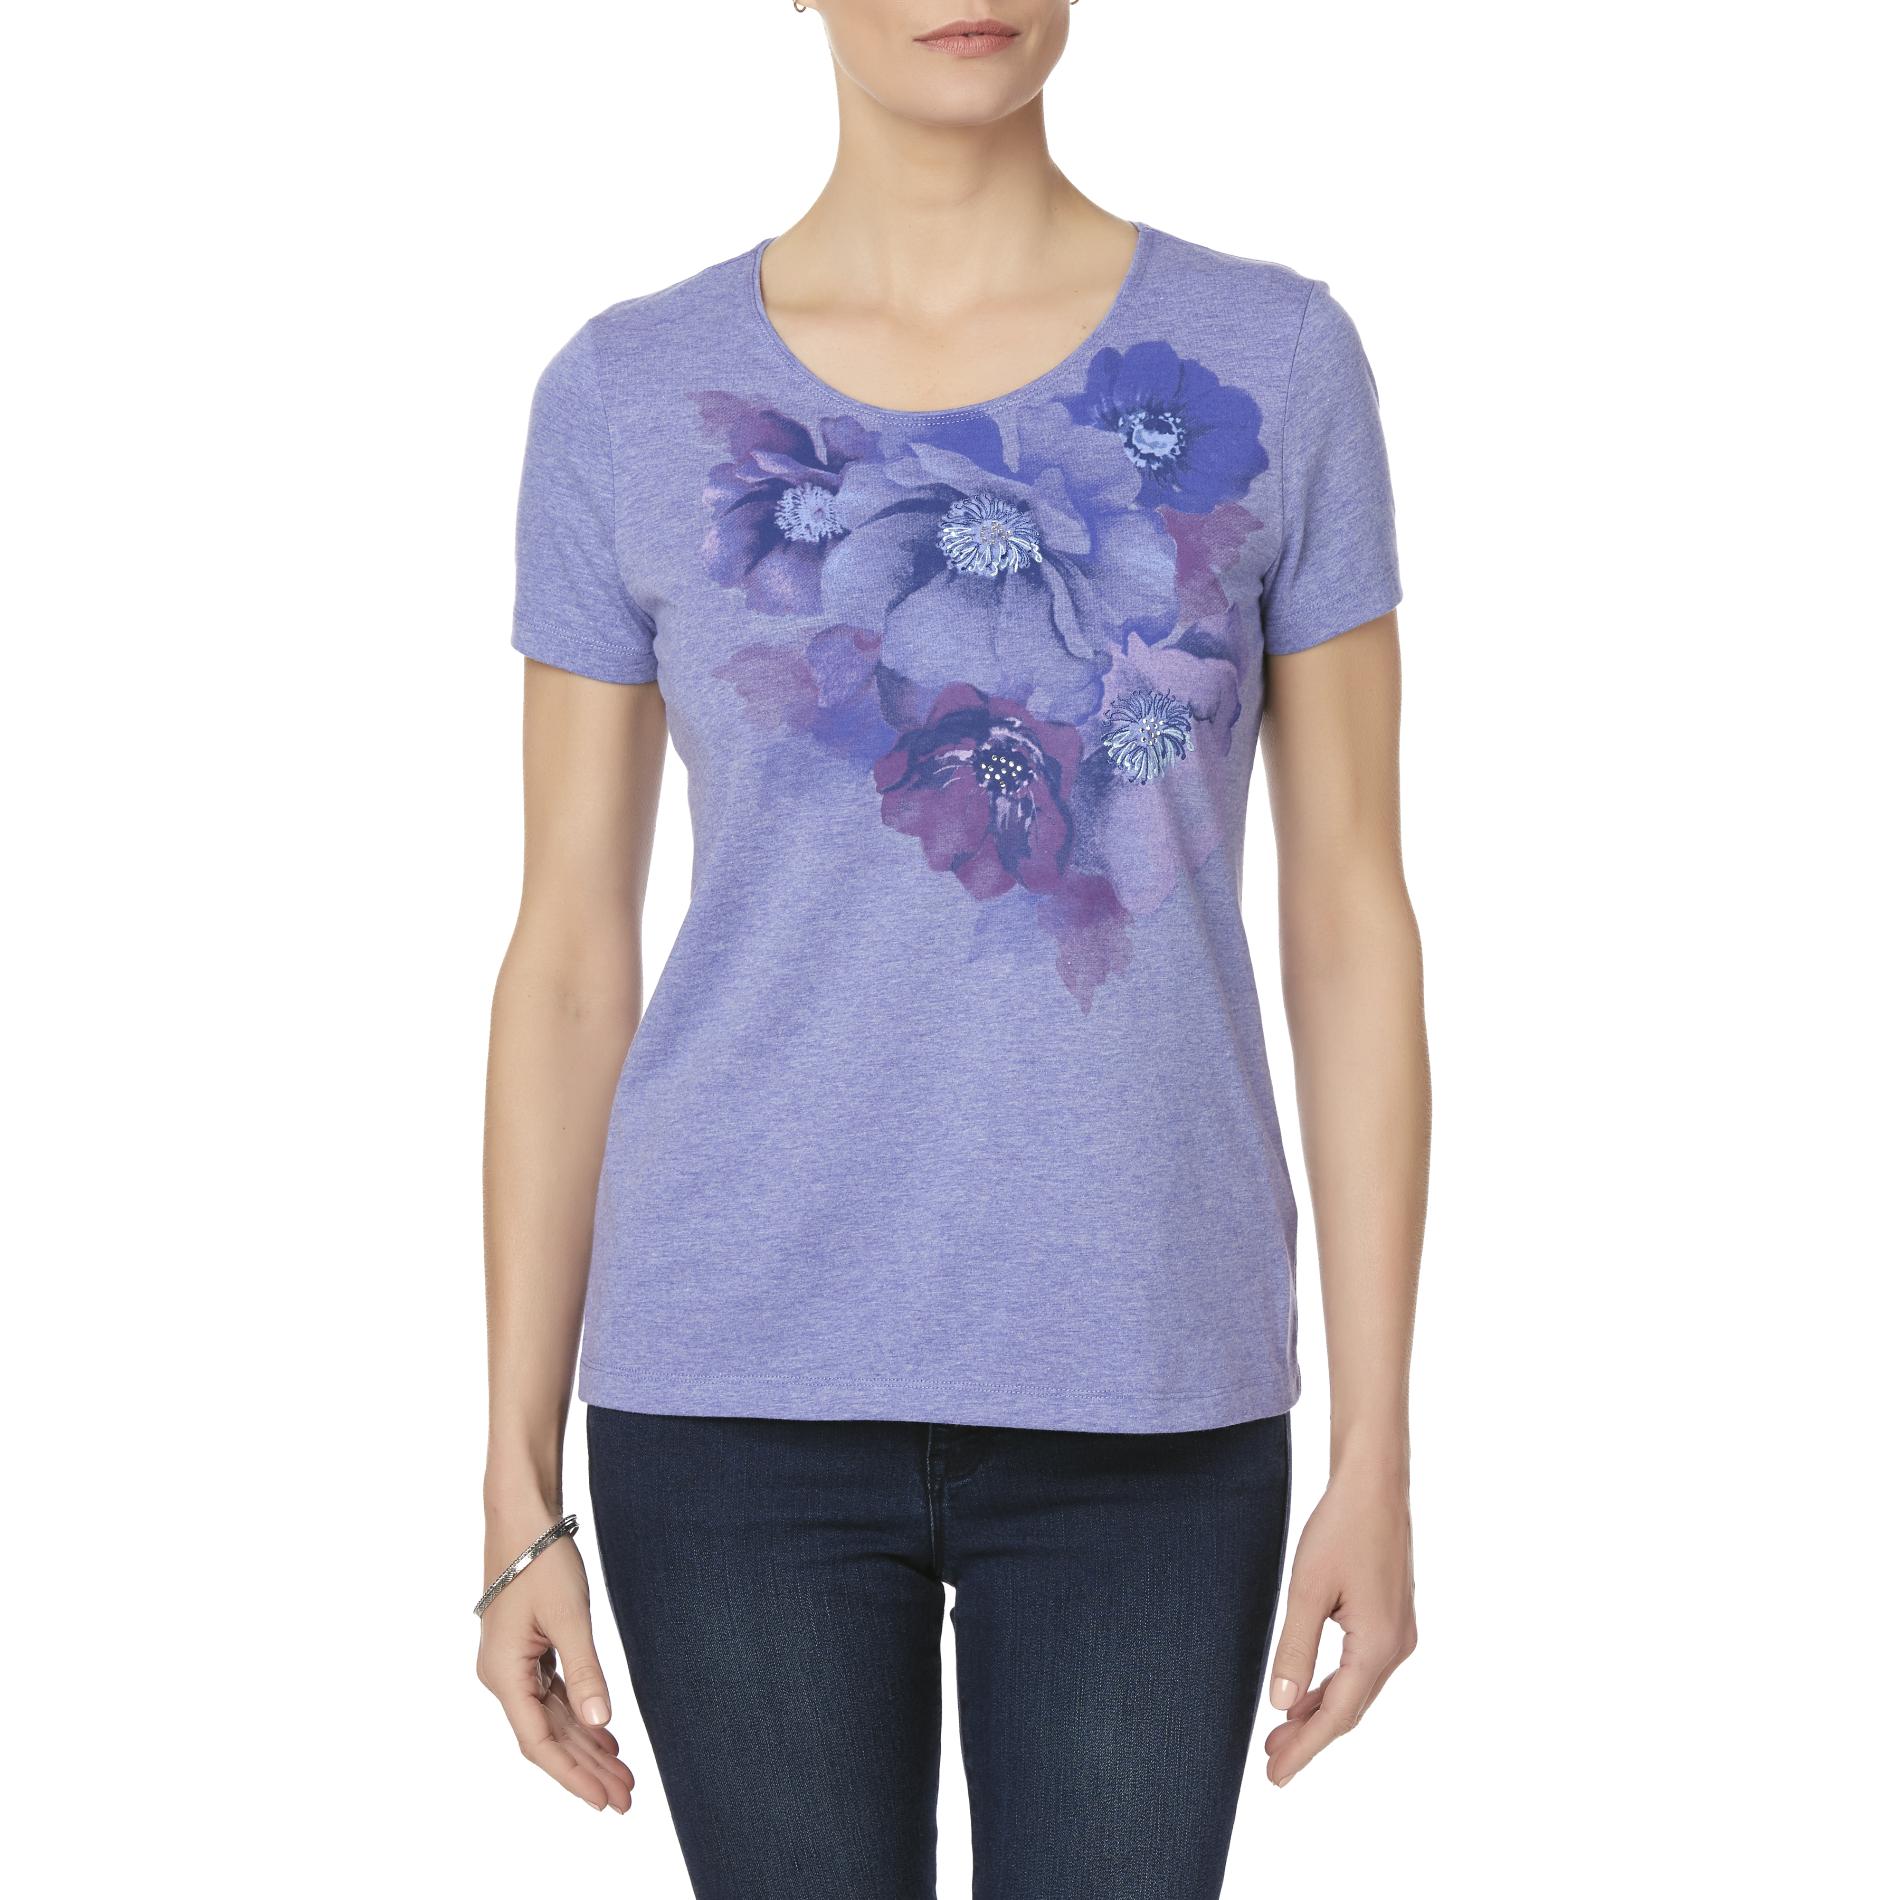 Laura Scott Women's Embellished Graphic T-Shirt - Floral